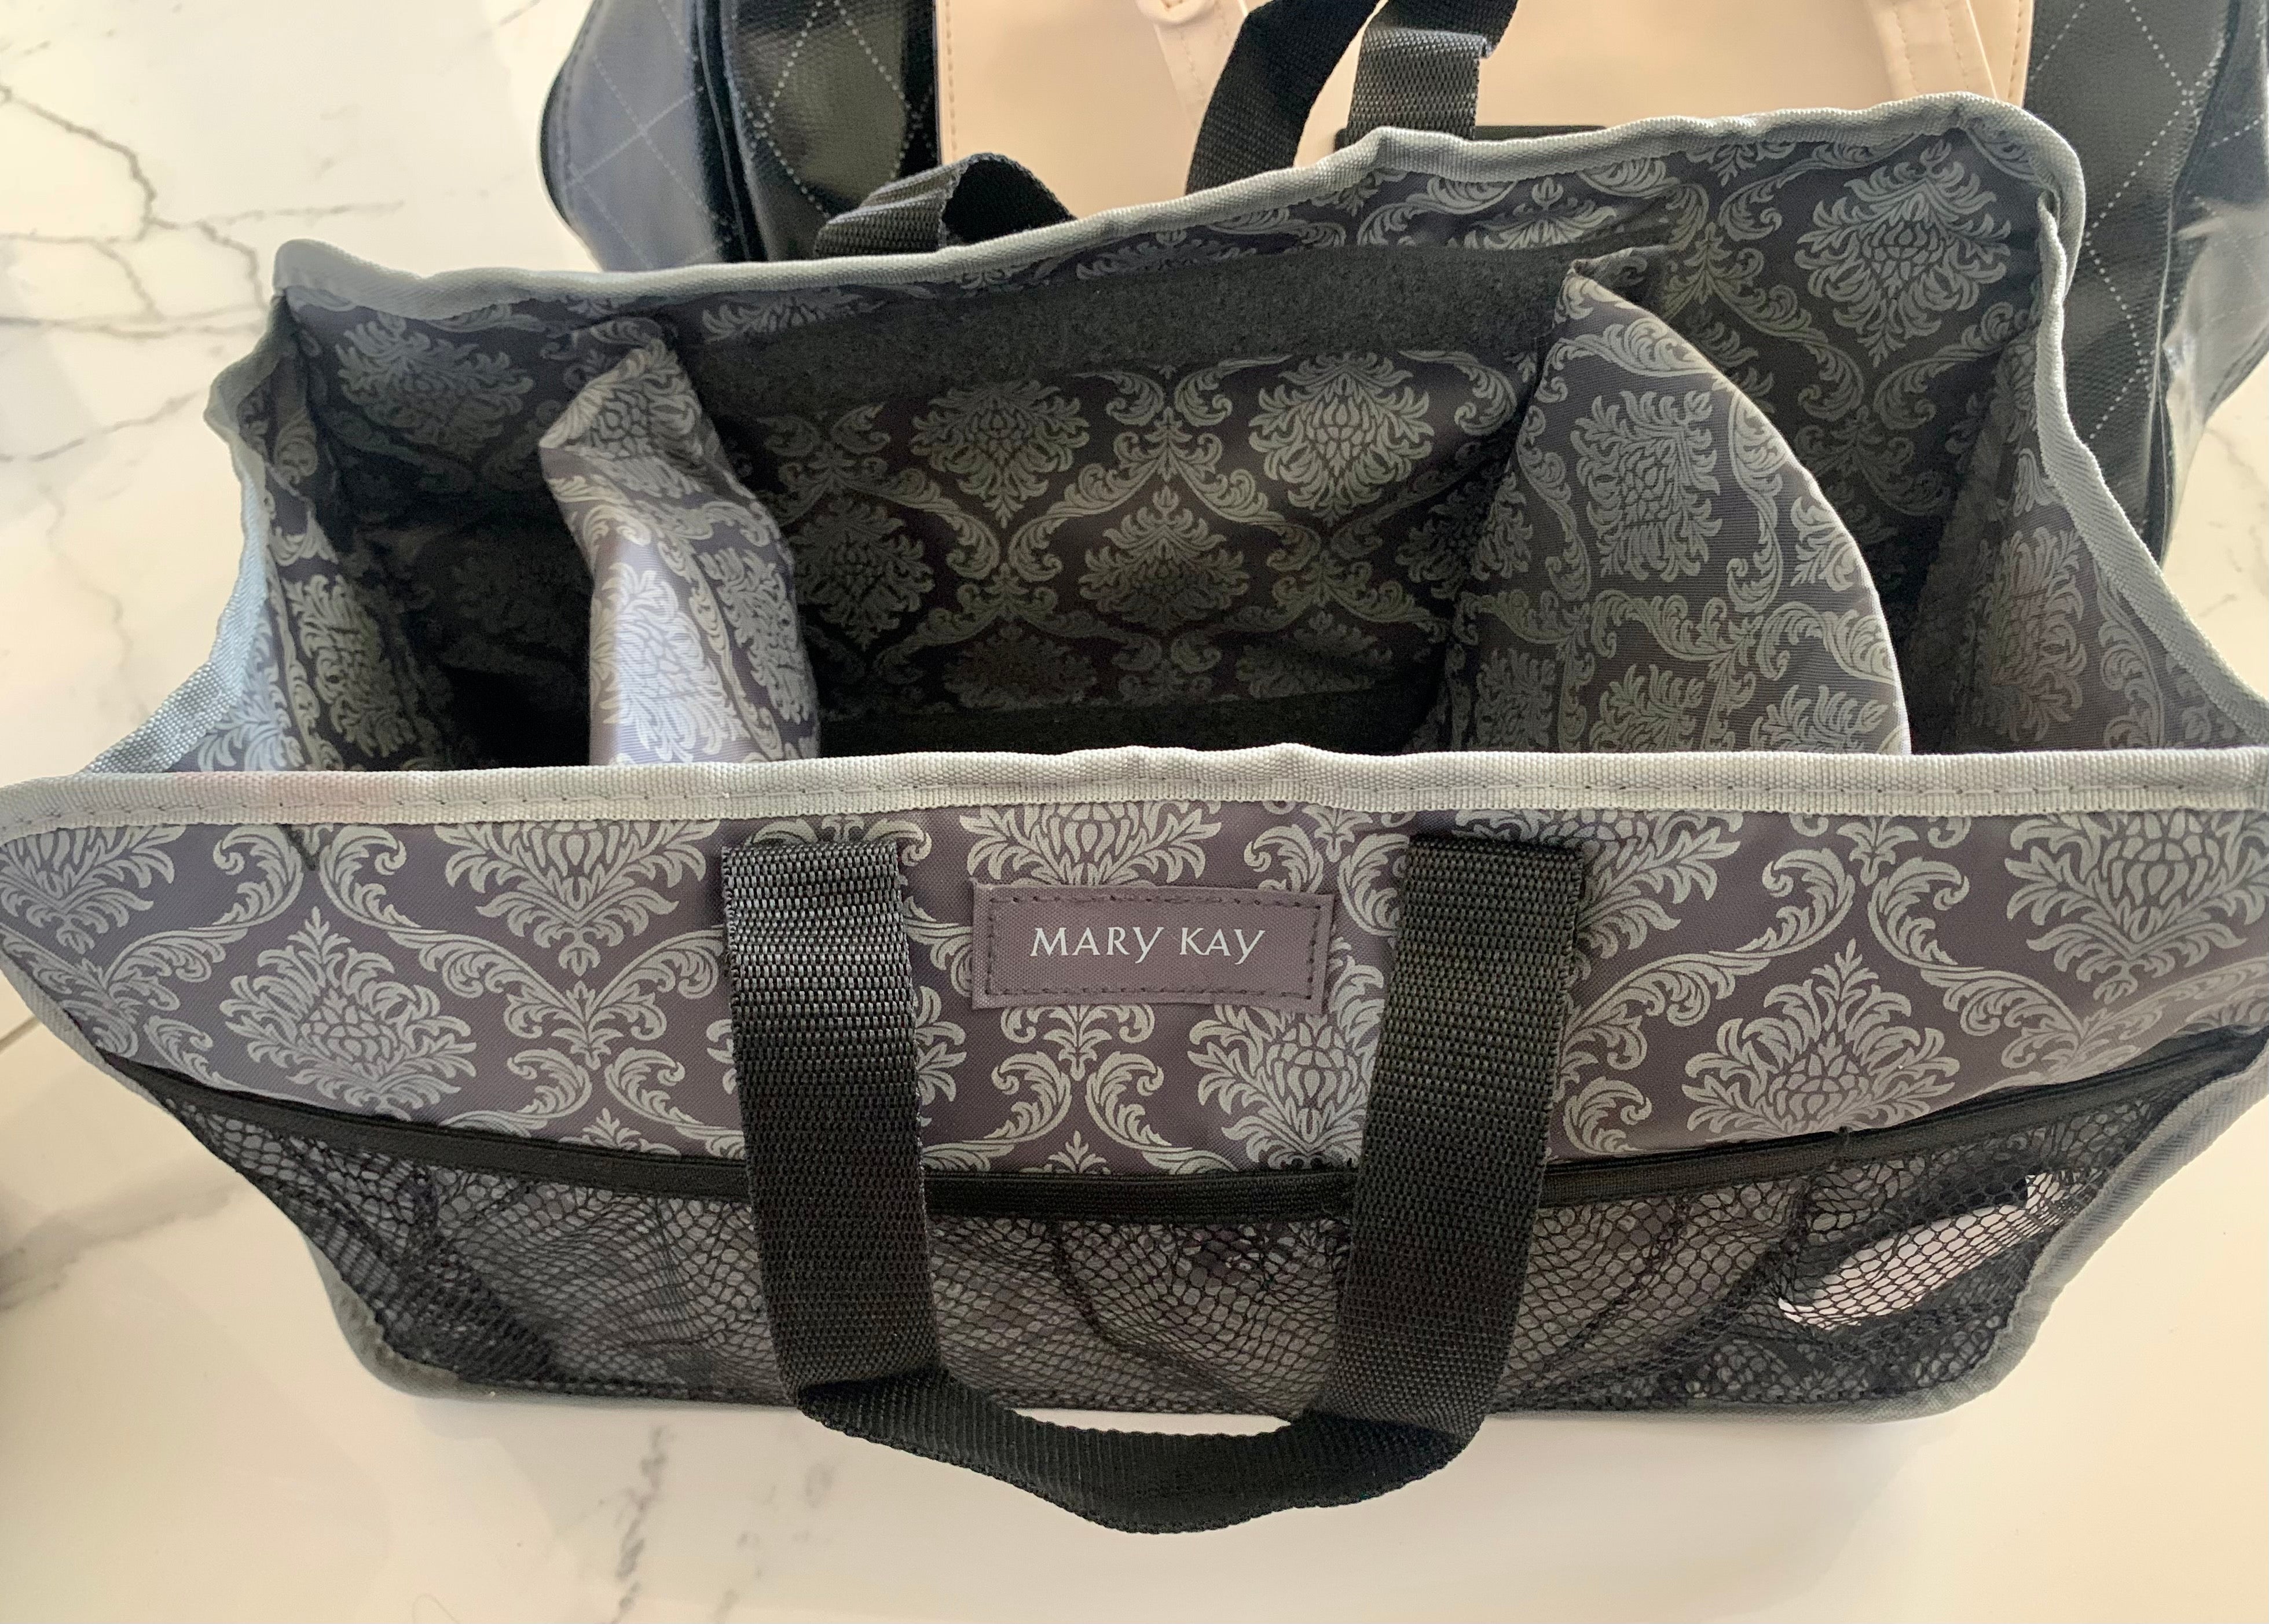 thirty-one deluxe organizing utility tote